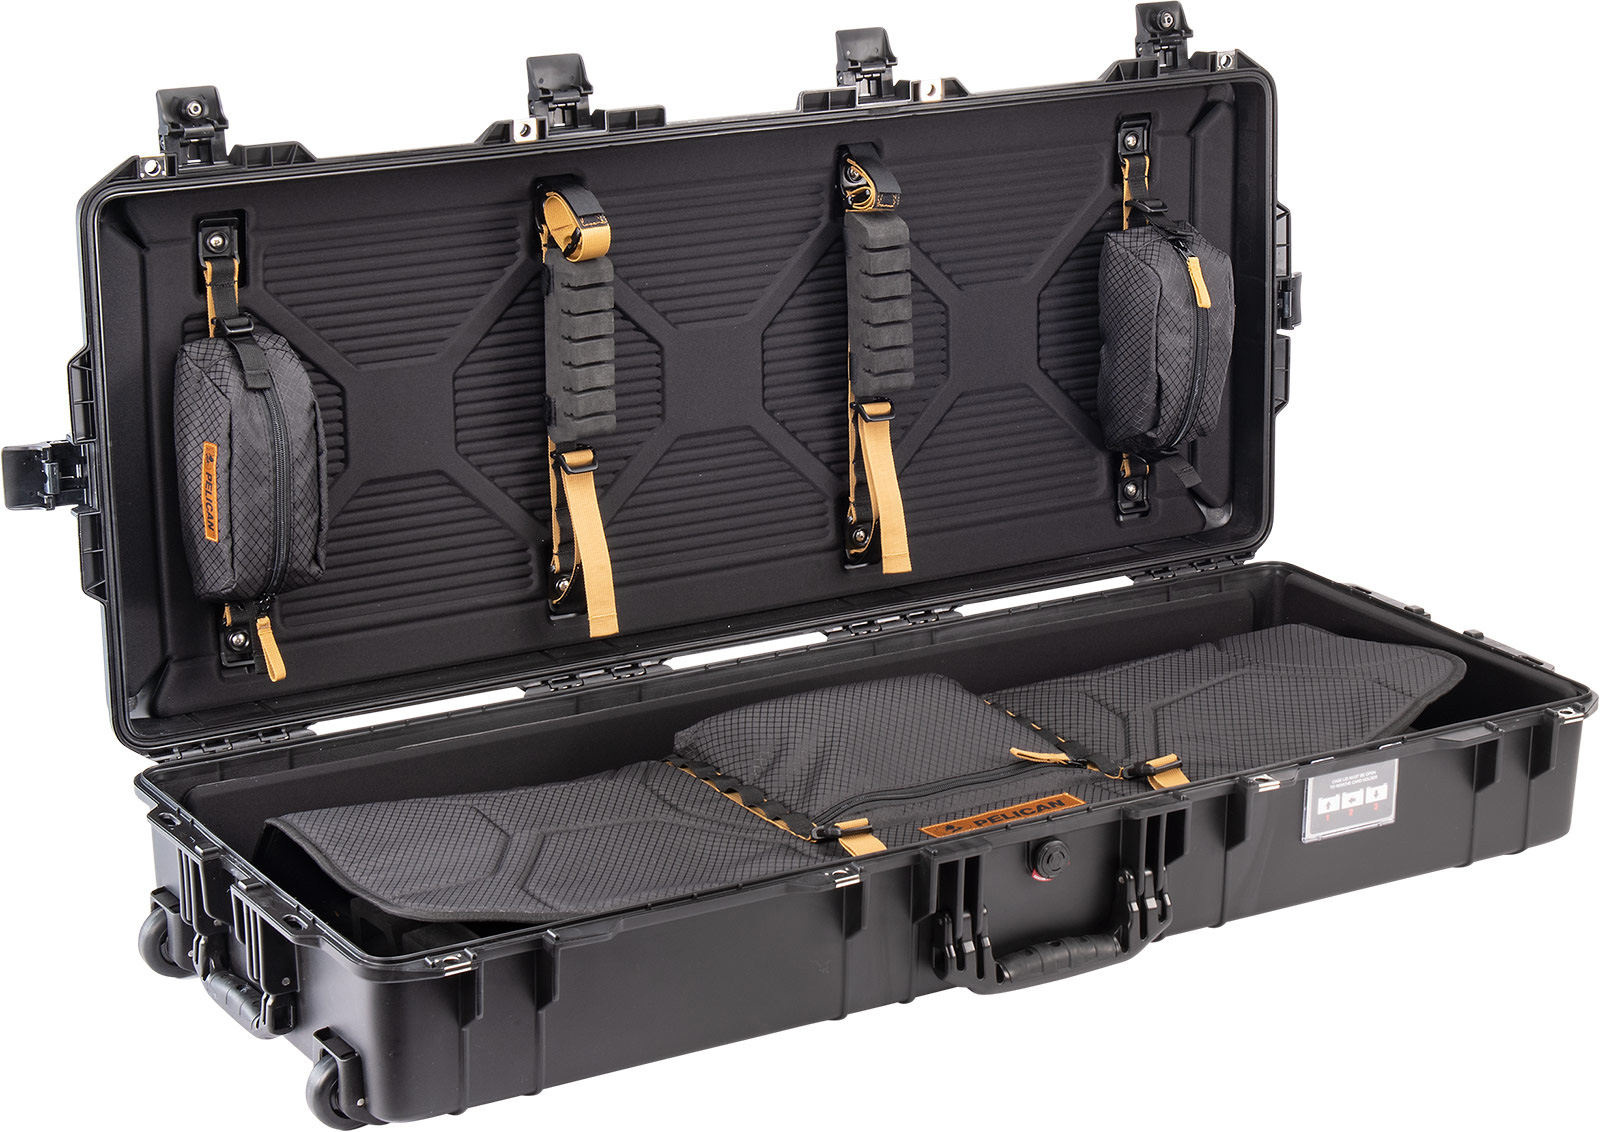 Bemærk Pacific Rose Pelican Air 1745 Bow Case | 5 Star Rating w/ Free S&H